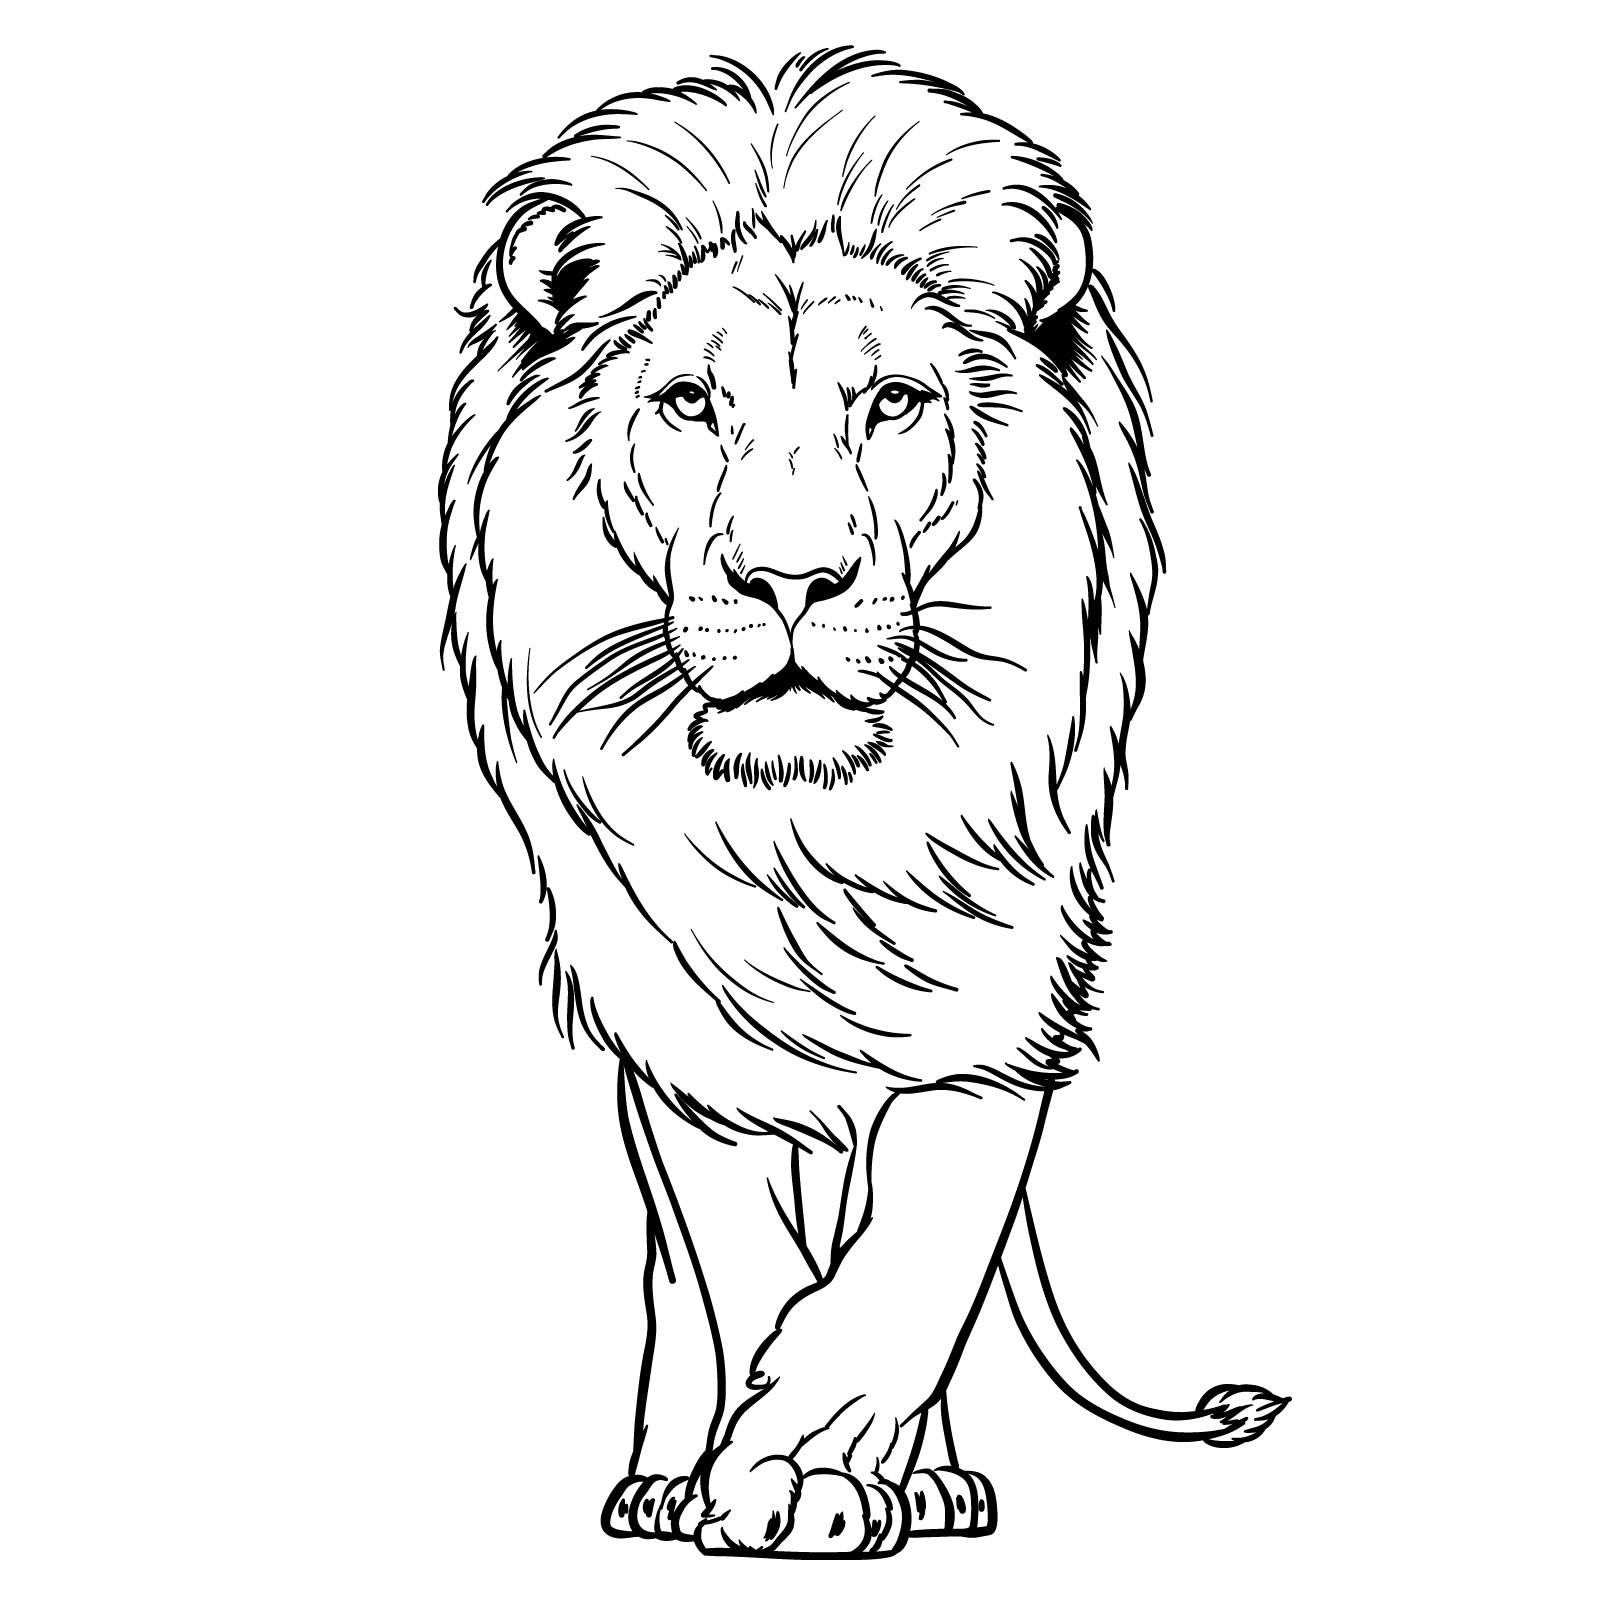 How to draw a walking lion in 3/4 view